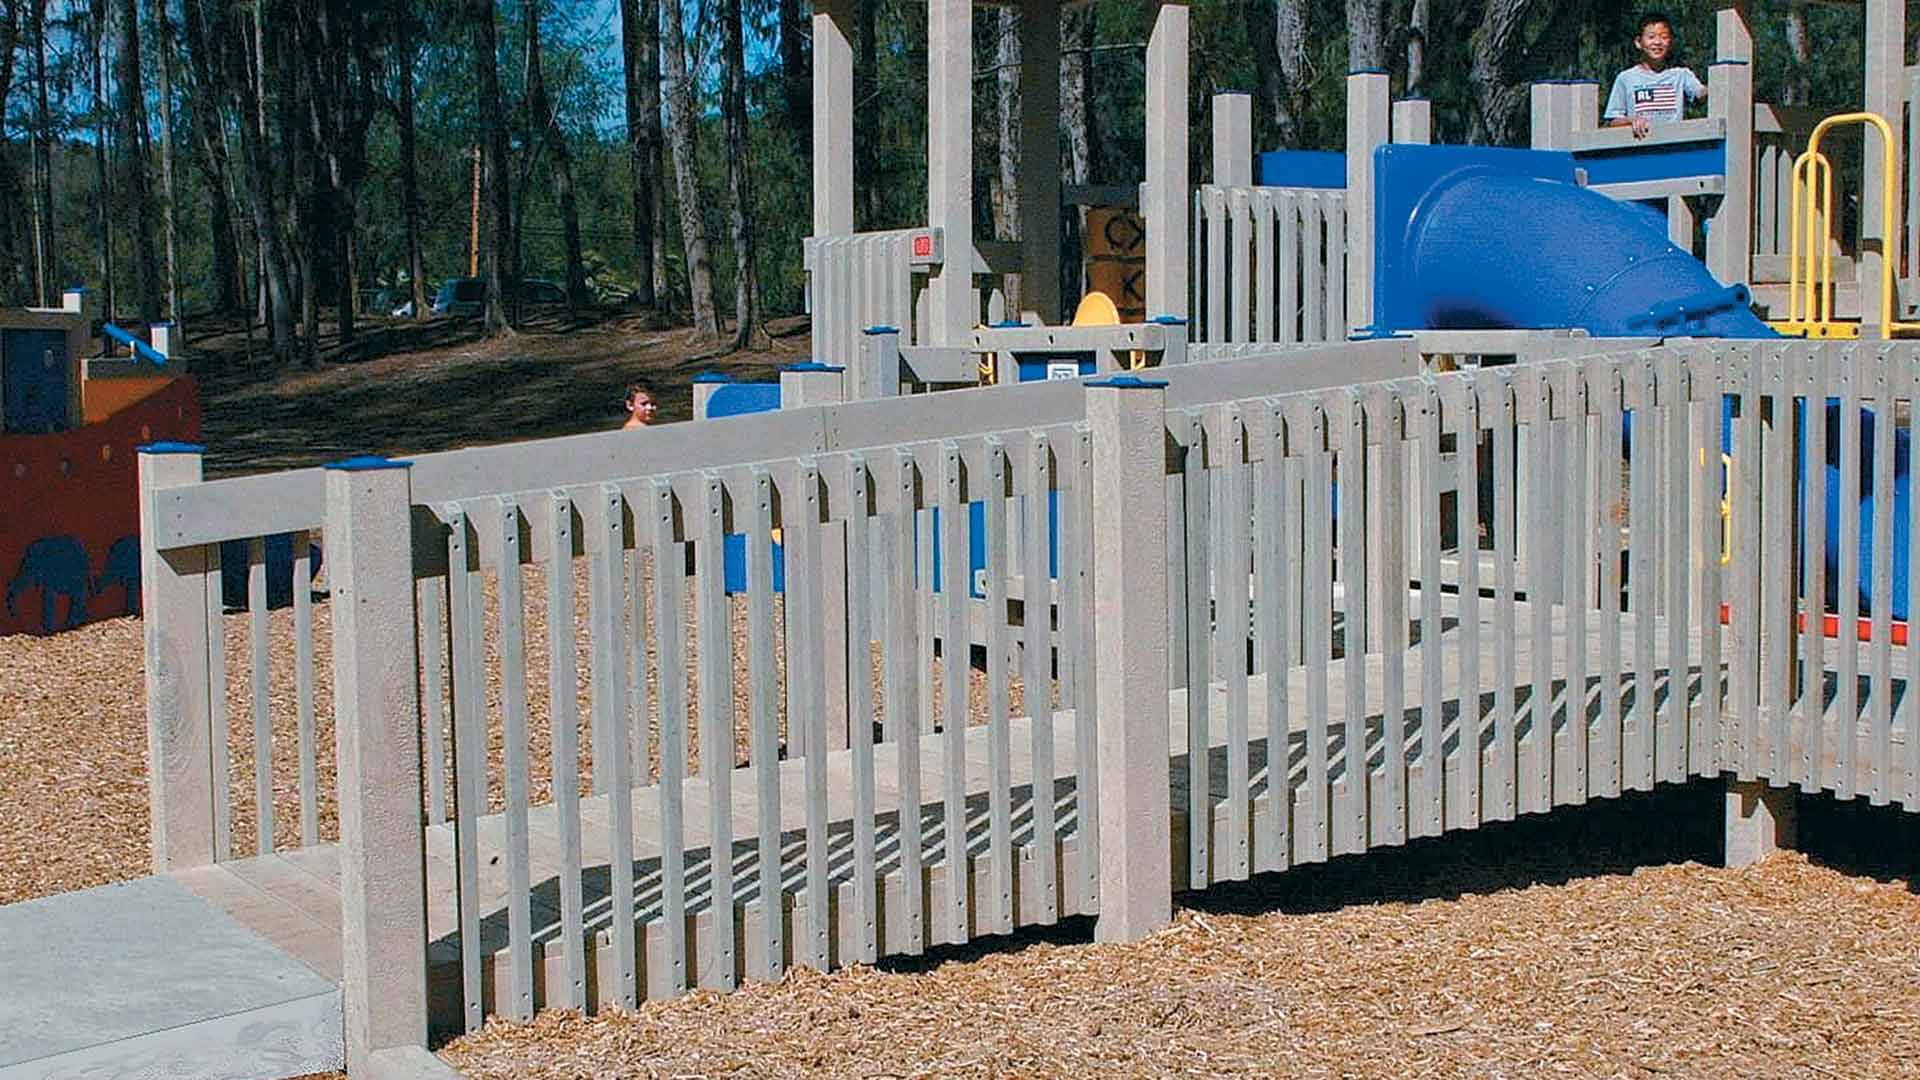 Play Spaces for All Abilities